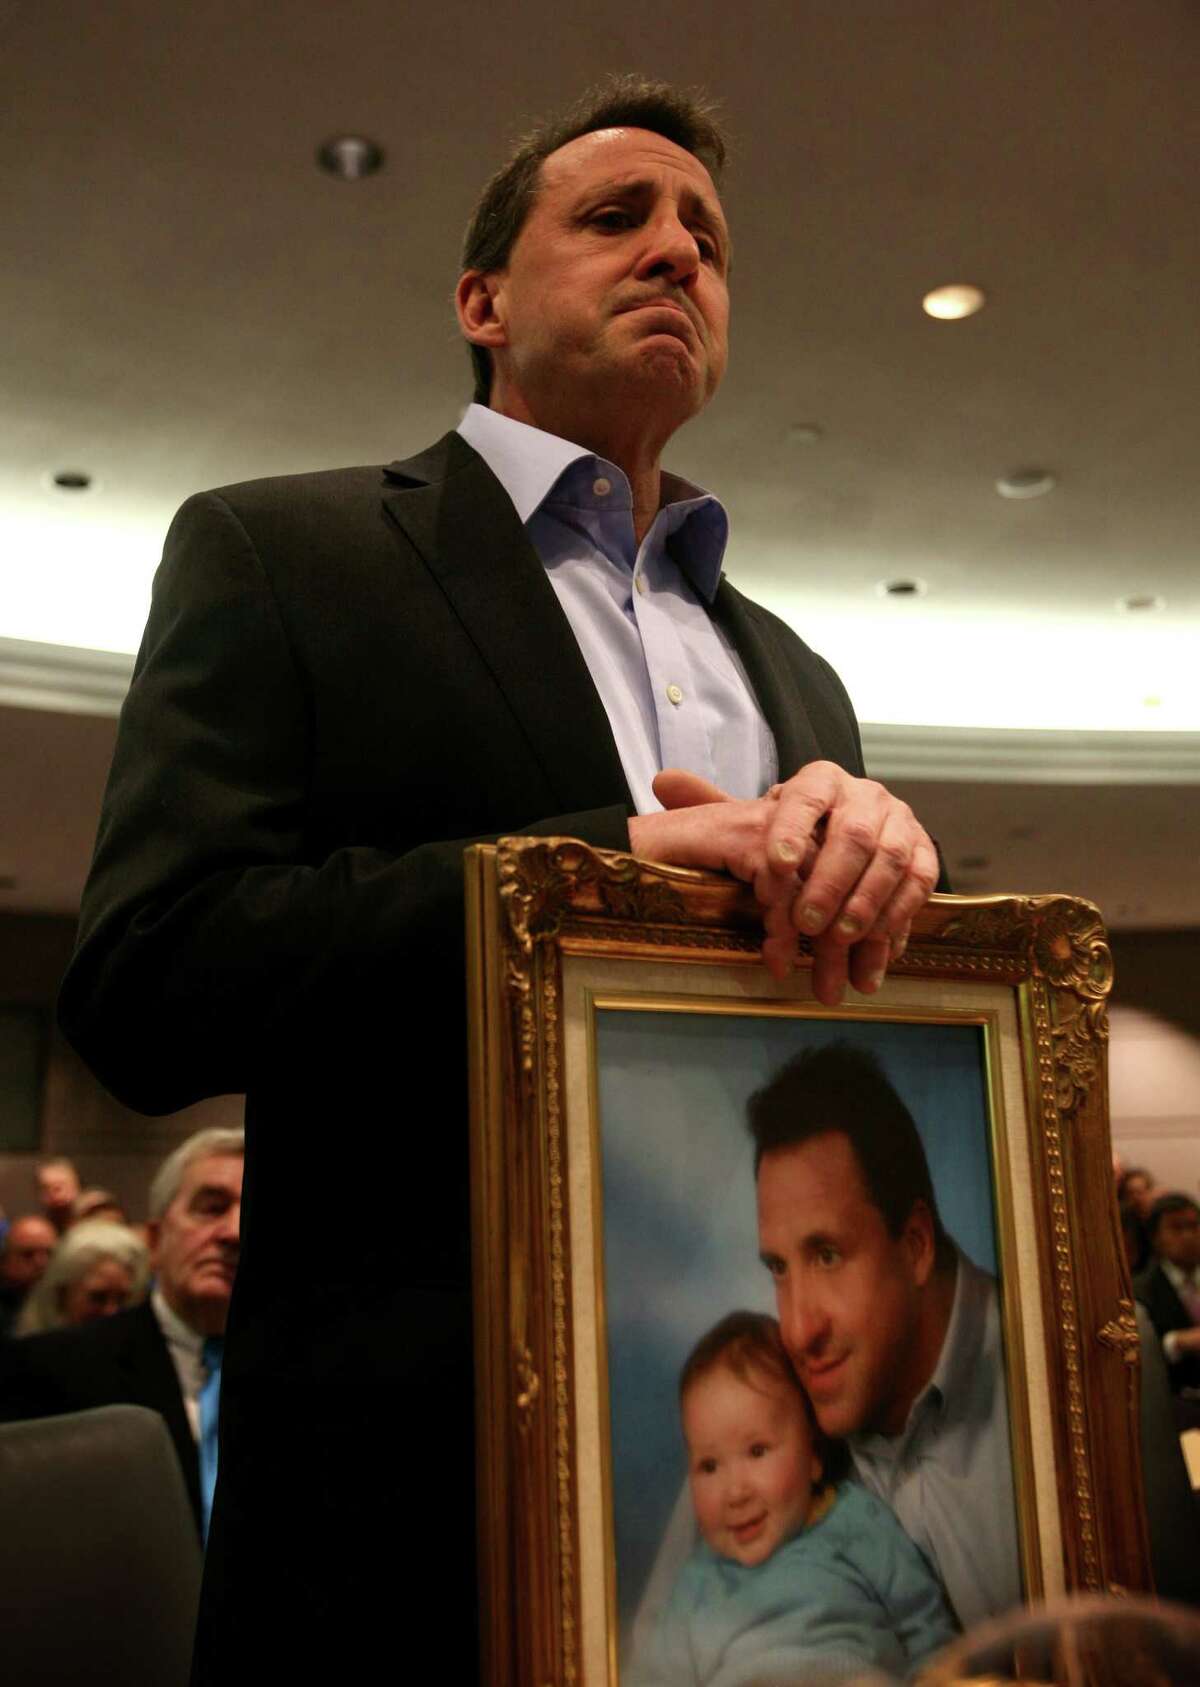 Neil Heslin, of Shelton, holds a portrait of himself and his son, Jesse Lewis, one of the children killed in the Sandy Hook School shooting, during testimony before the Gun Violence Prevention Working Group at the Legislative Office Building in Hartford on Monday, January 28, 2012.